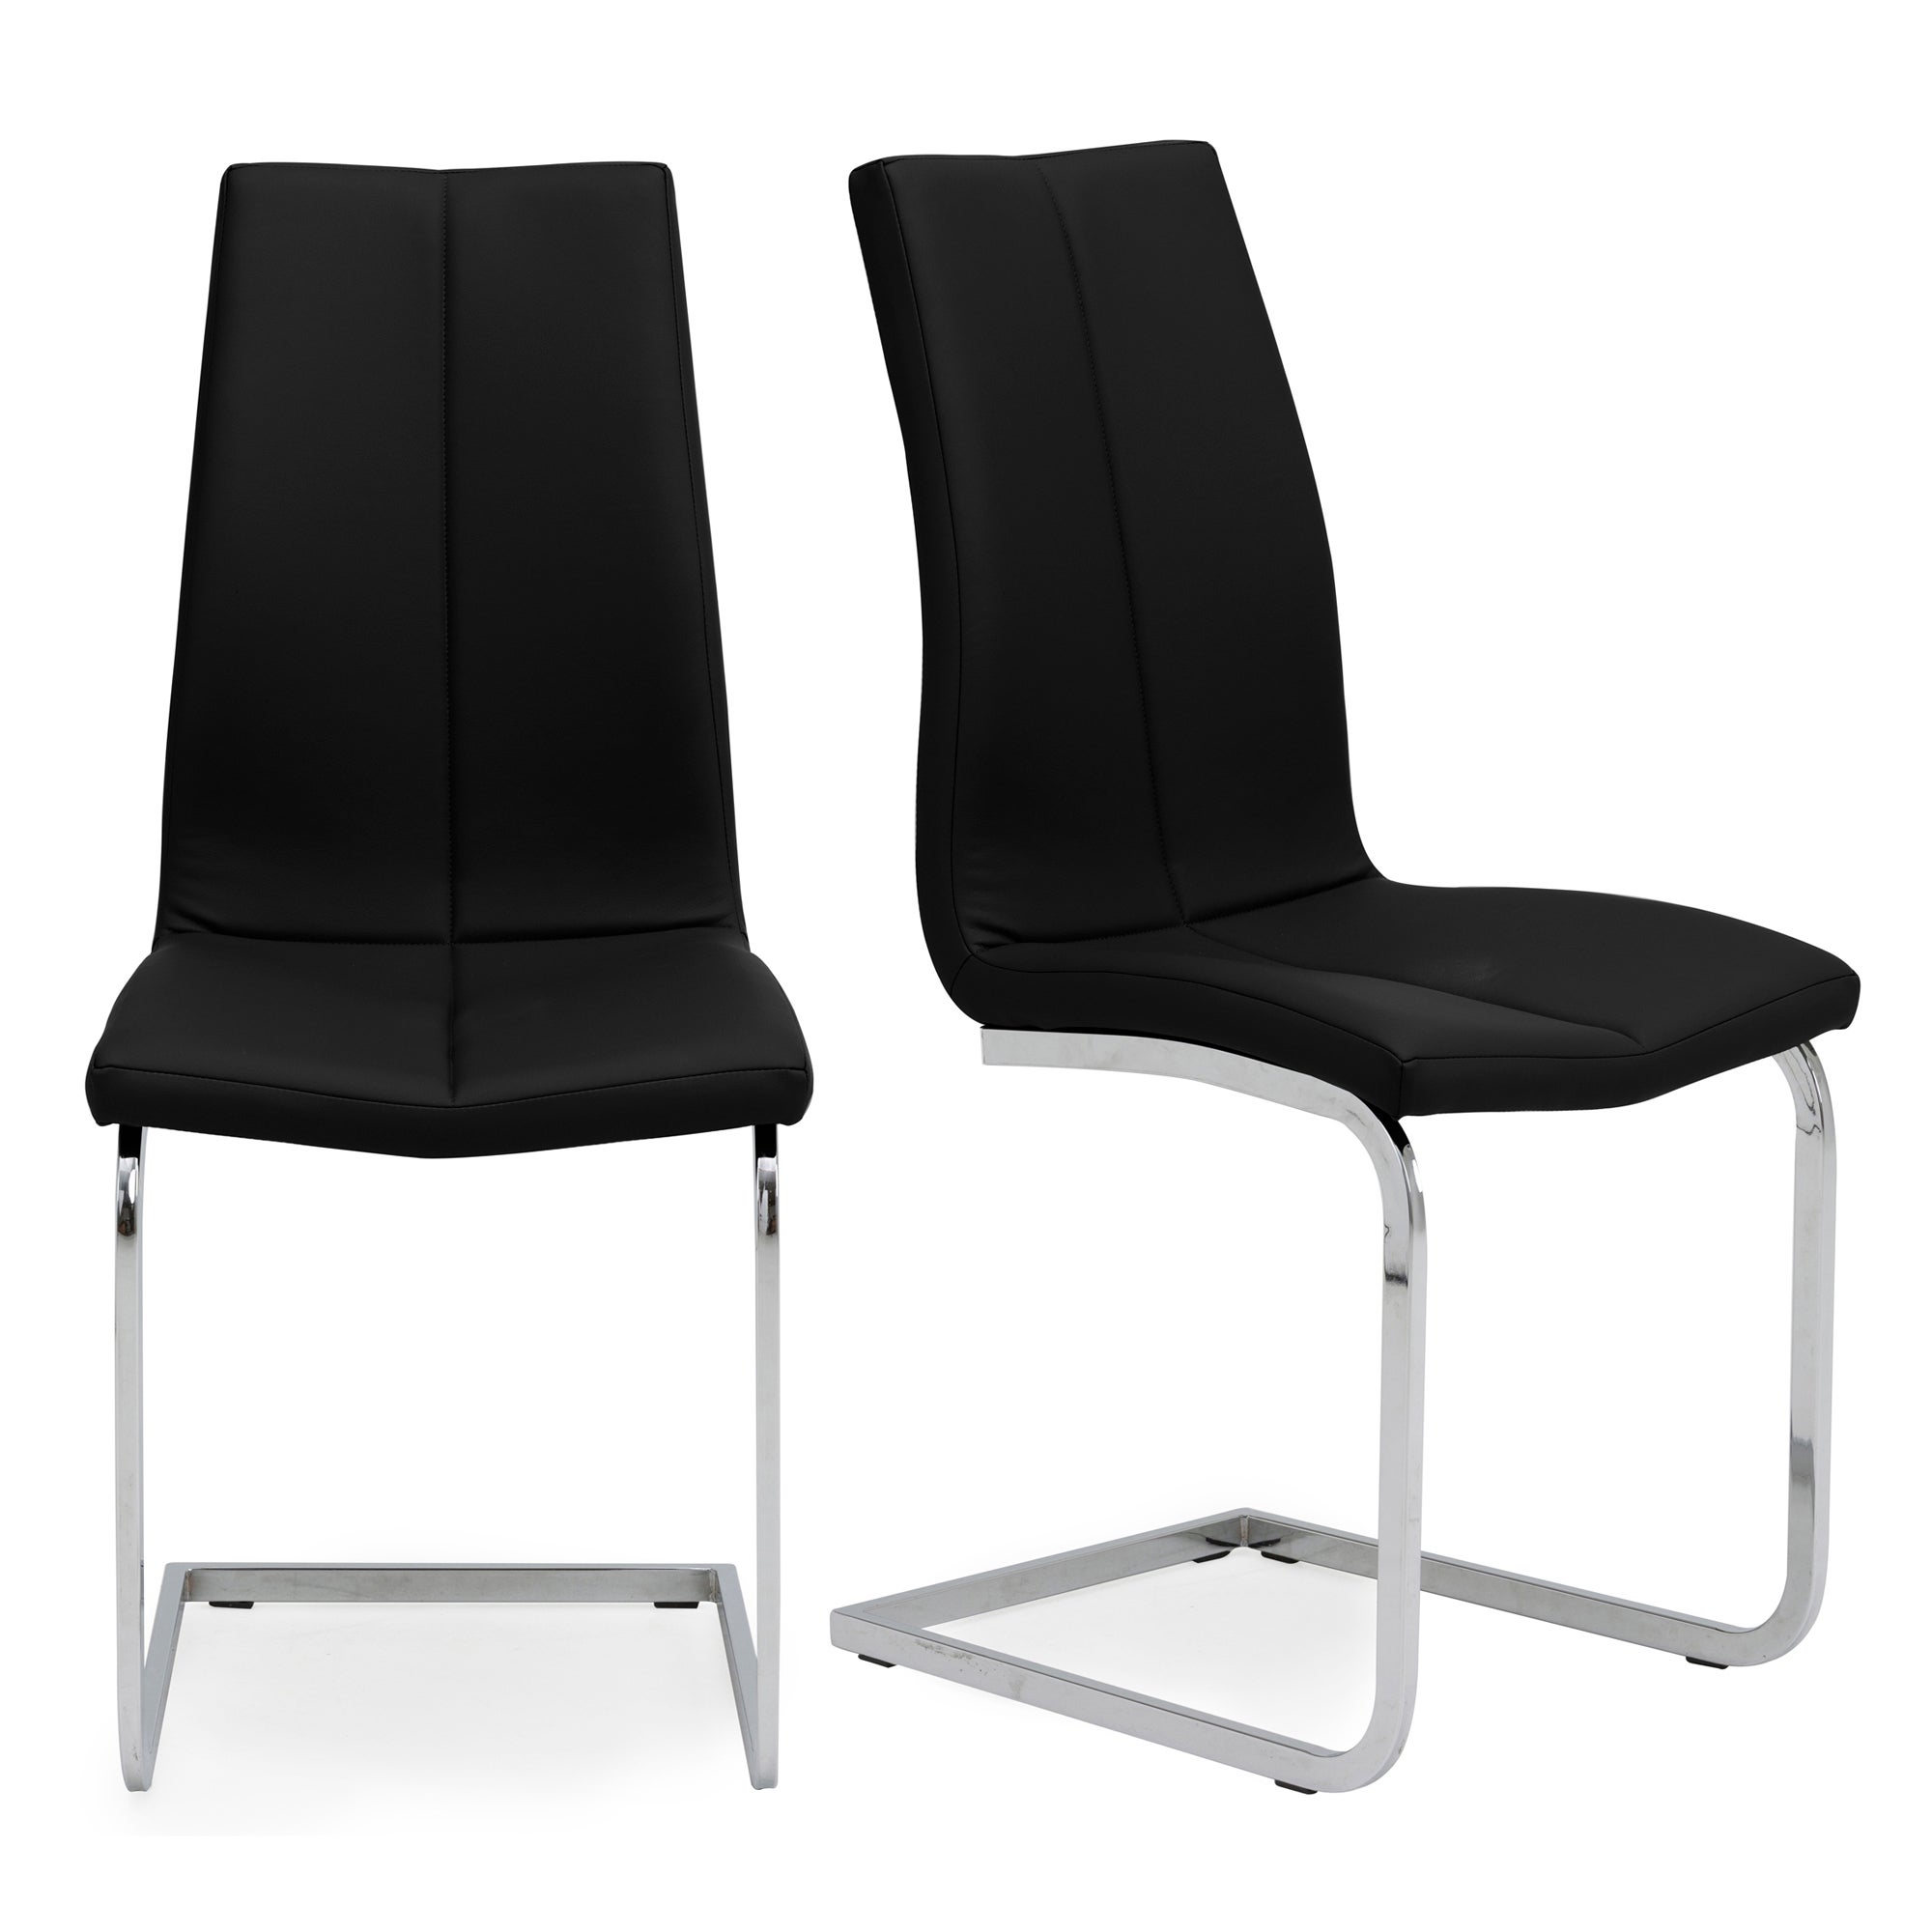 Jamison Set Of 2 Dining Chairs Faux Leather Black